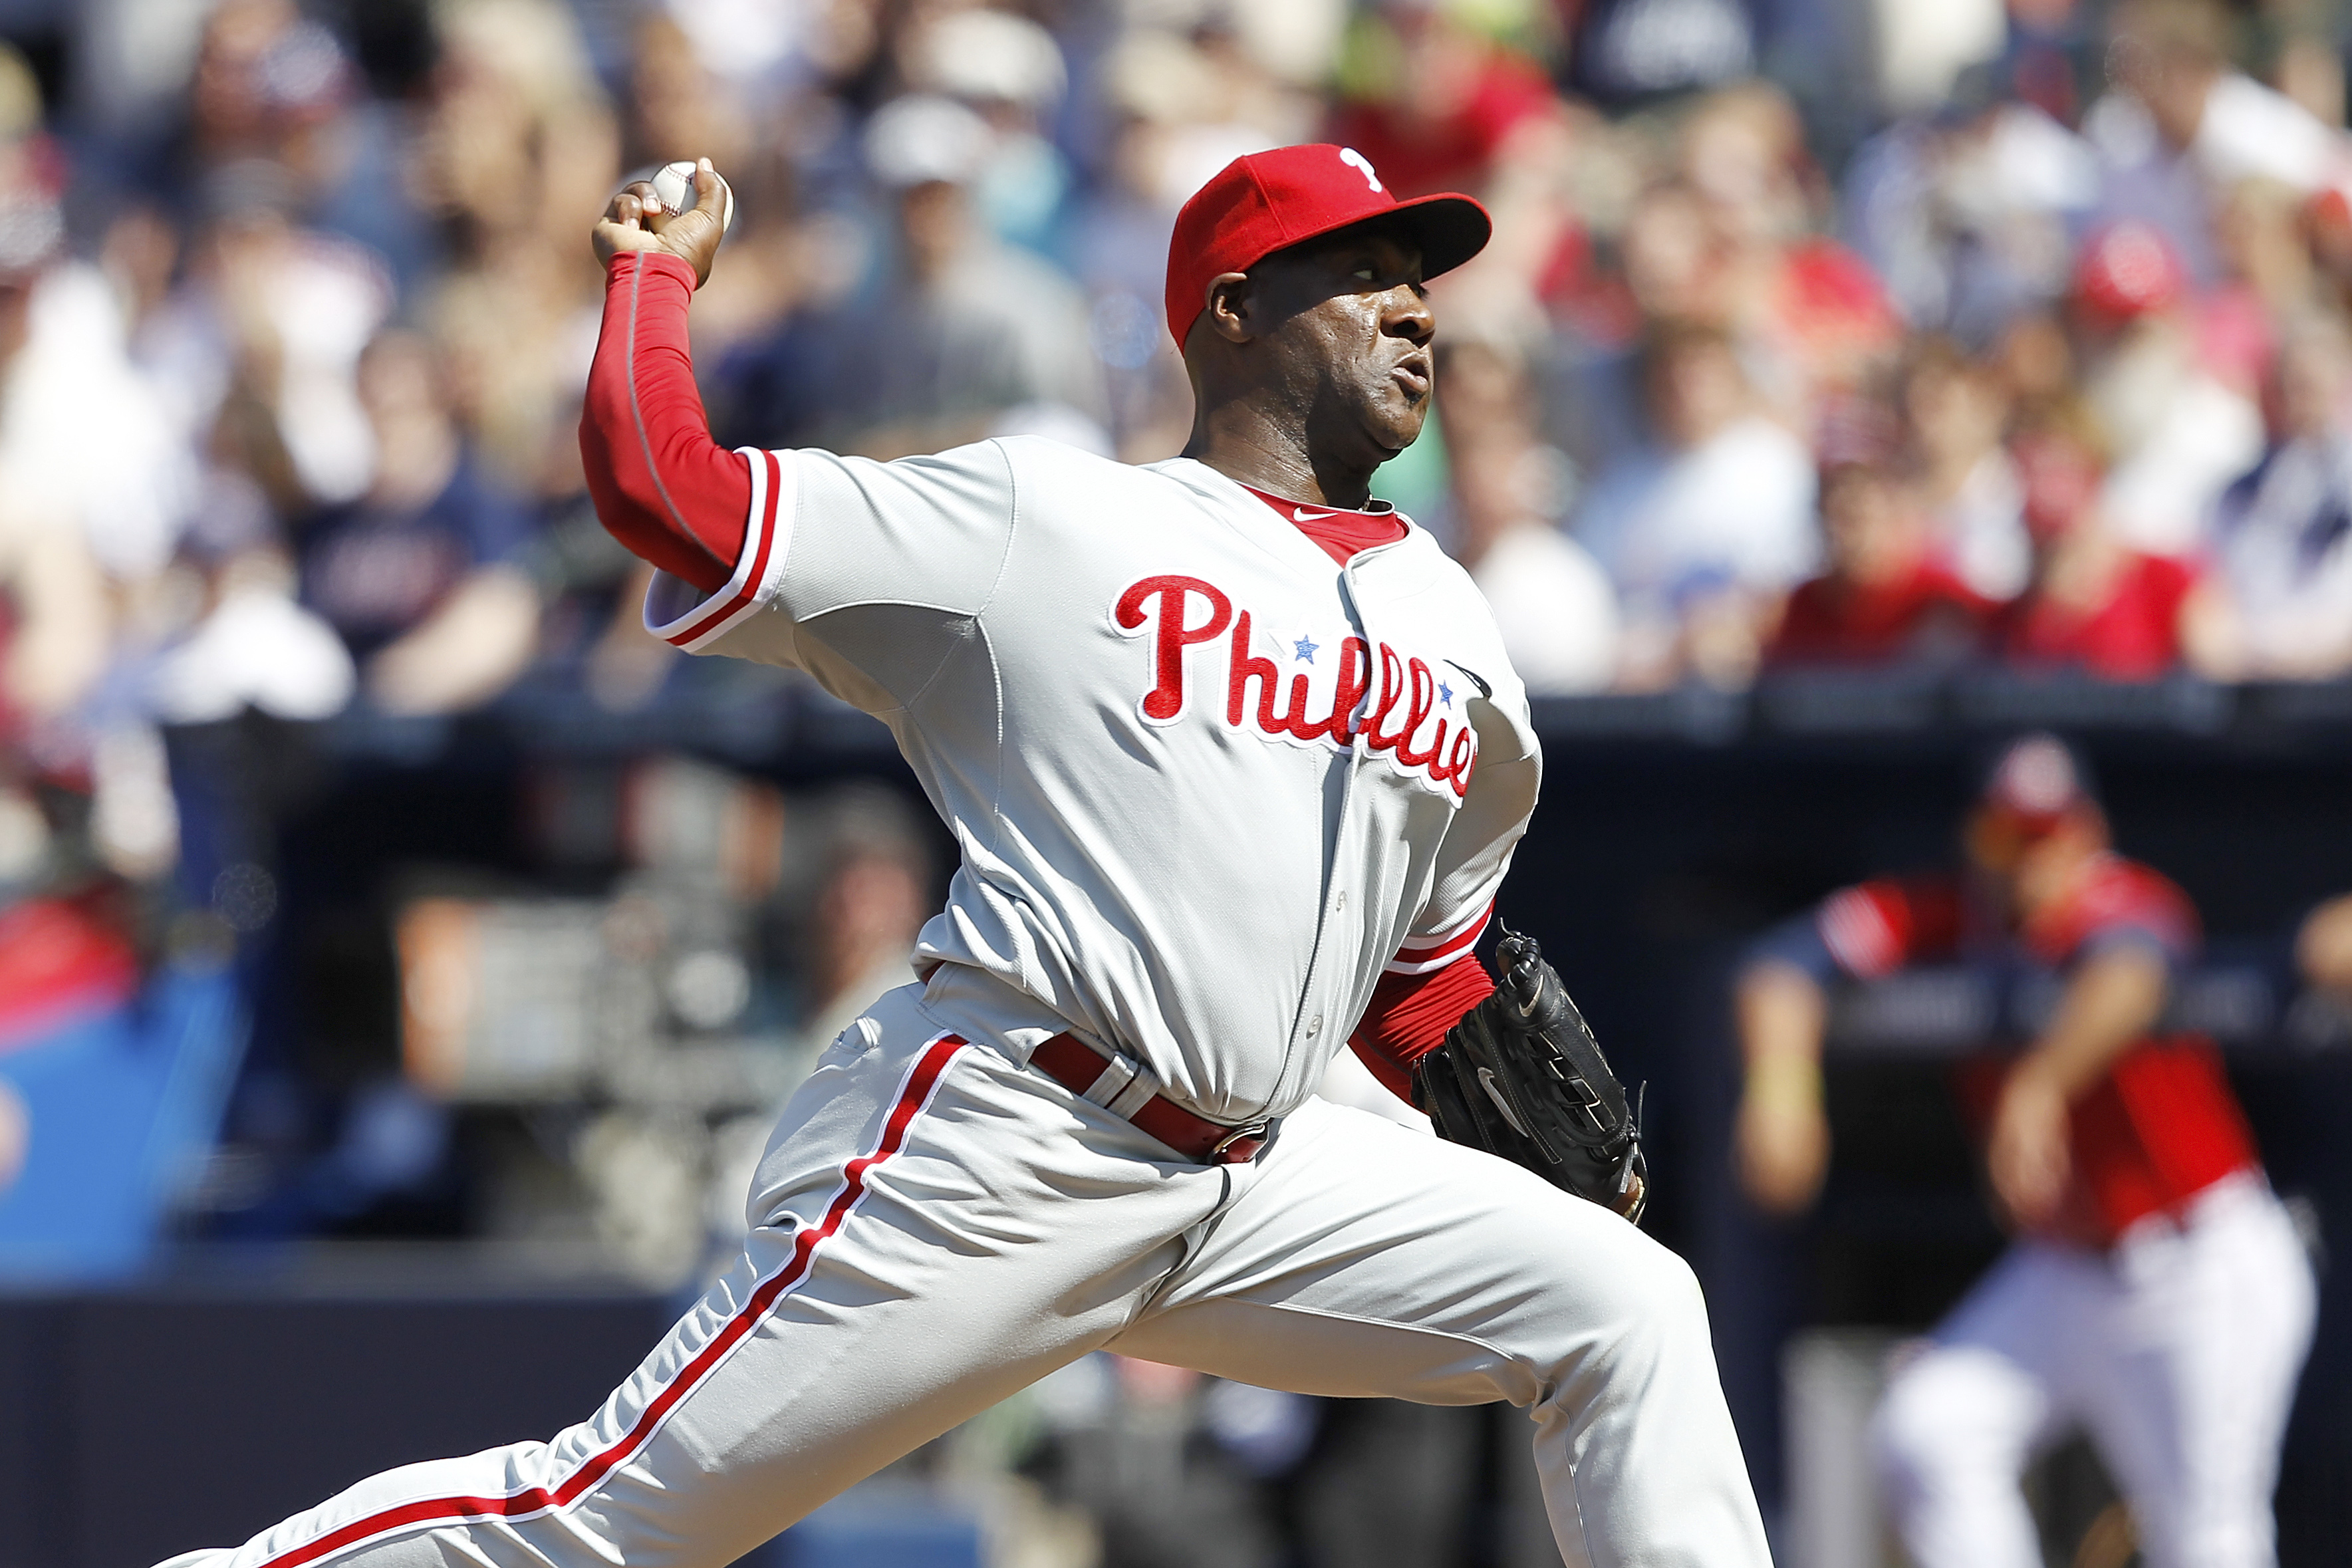 Lidge gets hooked on a feeling as Phillies beat Nationals – Delco Times